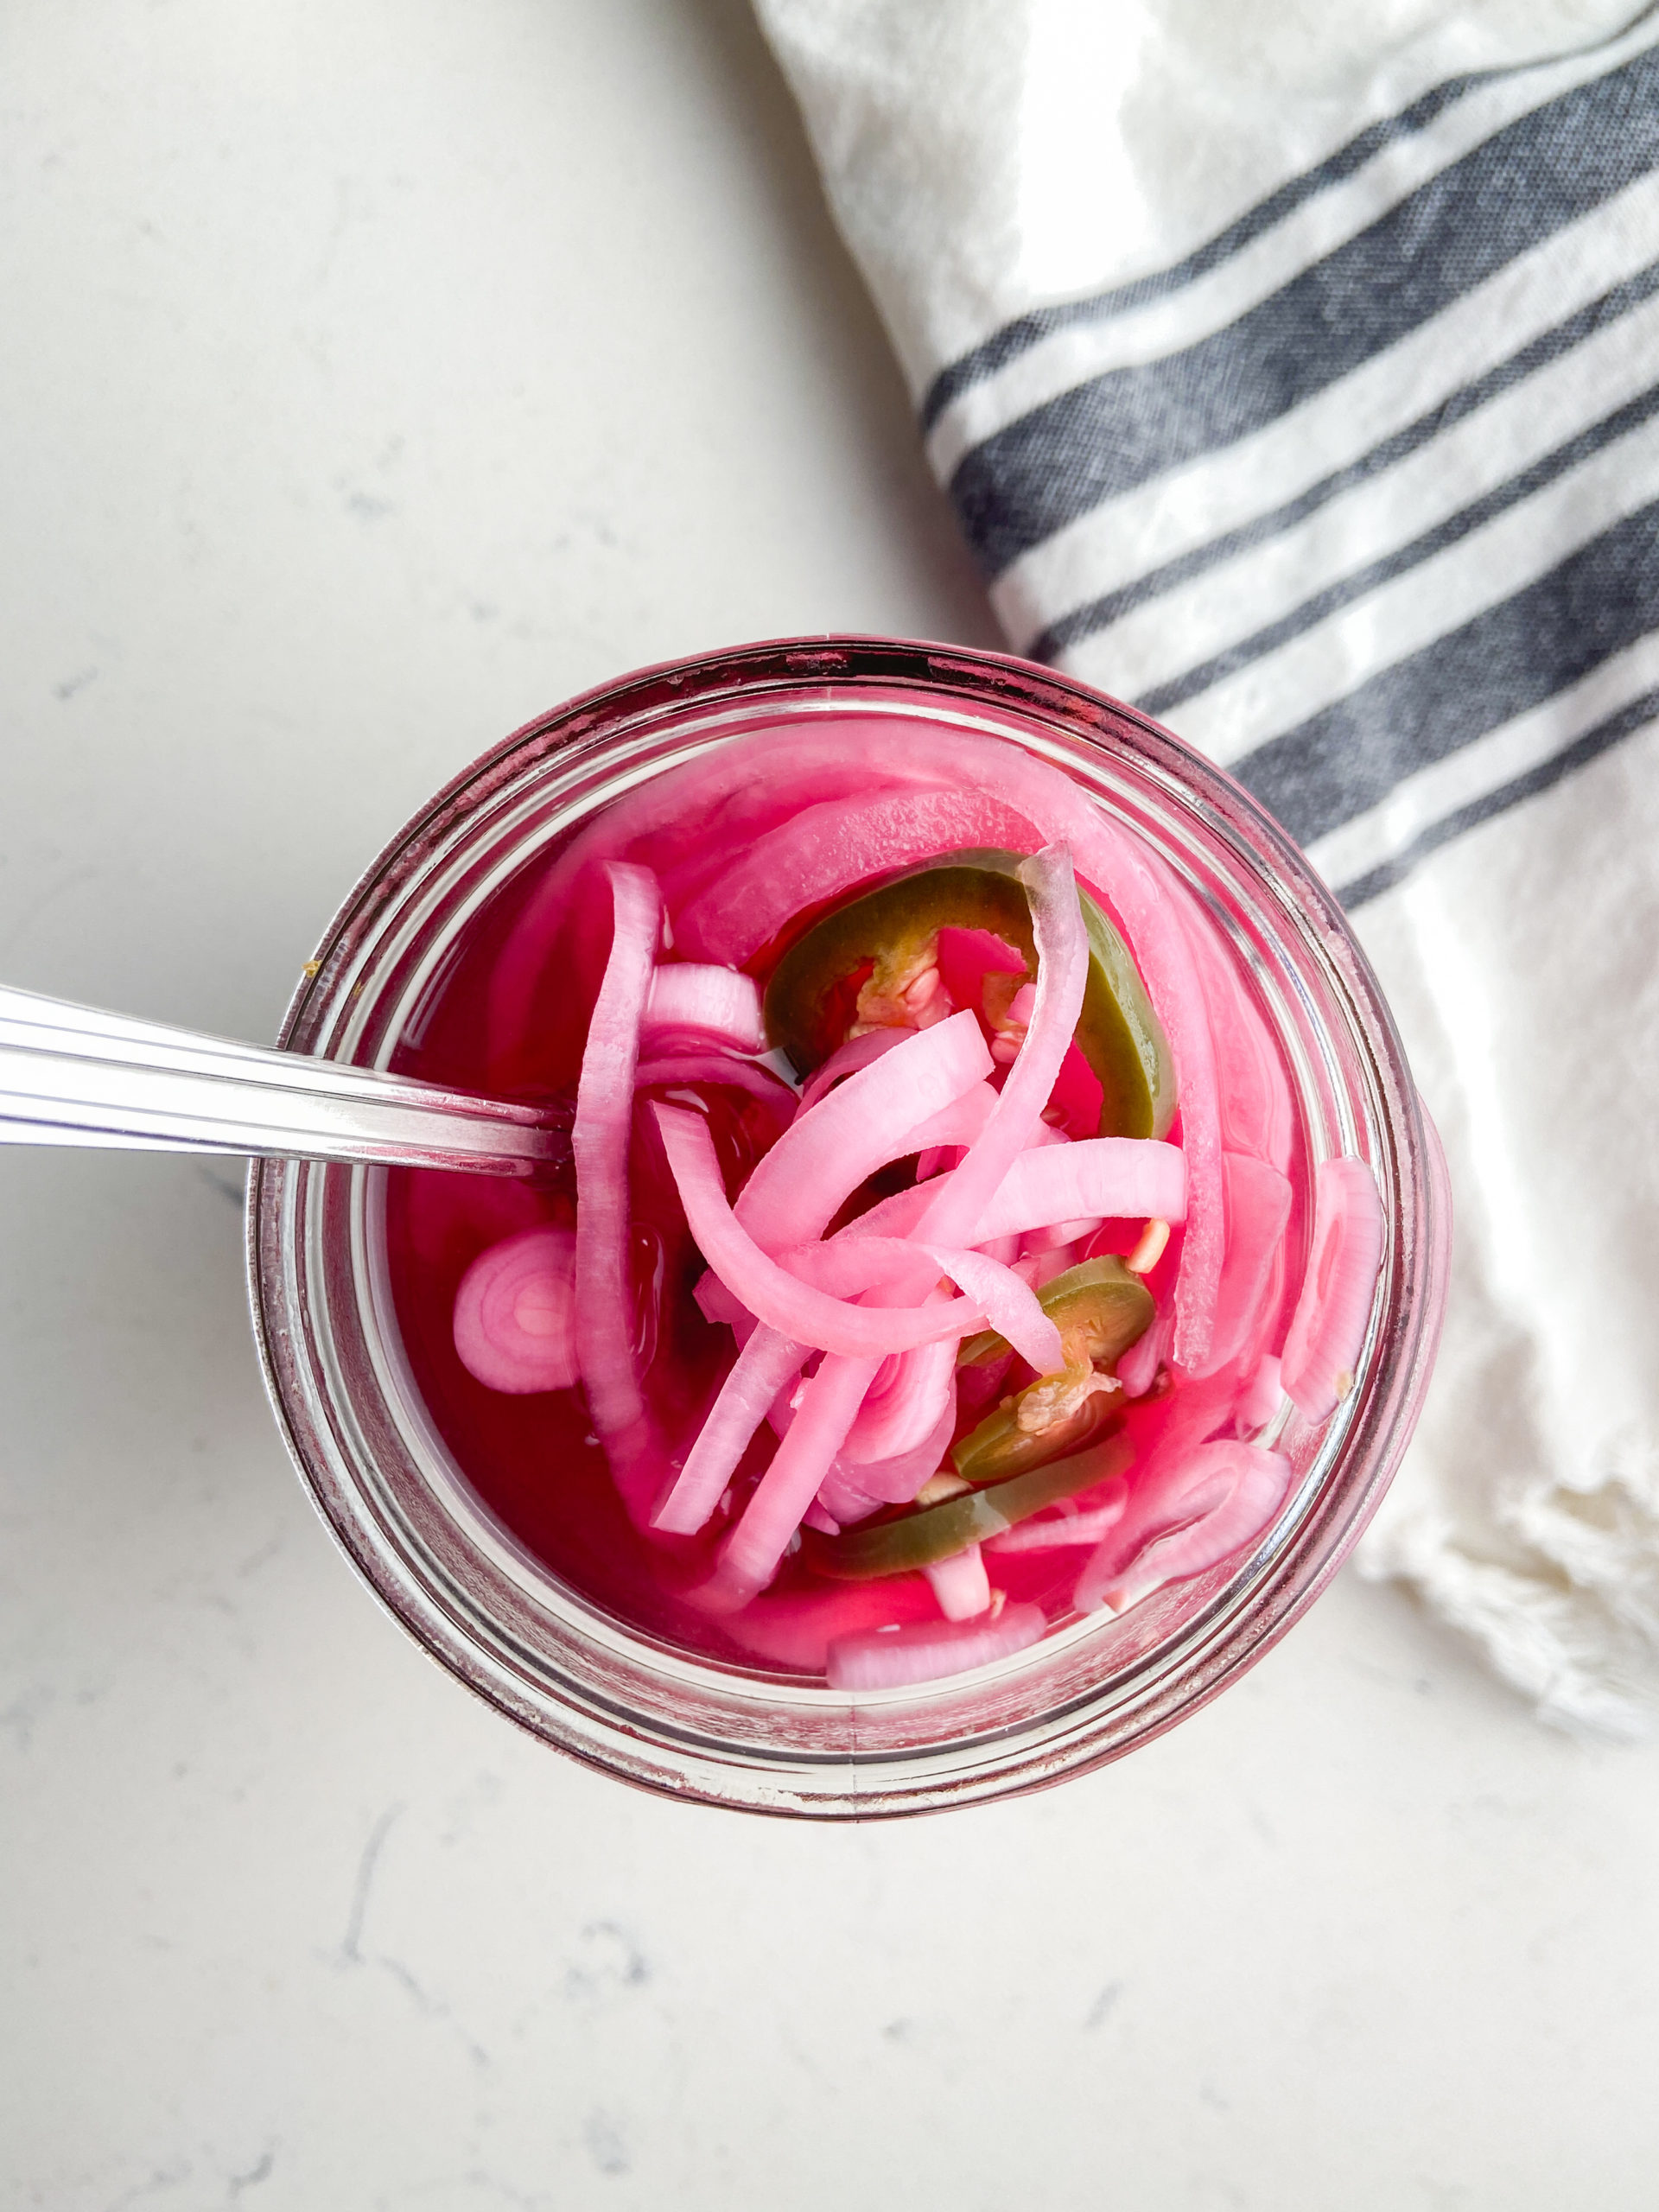 https://www.lifesambrosia.com/wp-content/uploads/Quick-Pickled-Red-Onions-Recipe-Photo-2-scaled.jpg